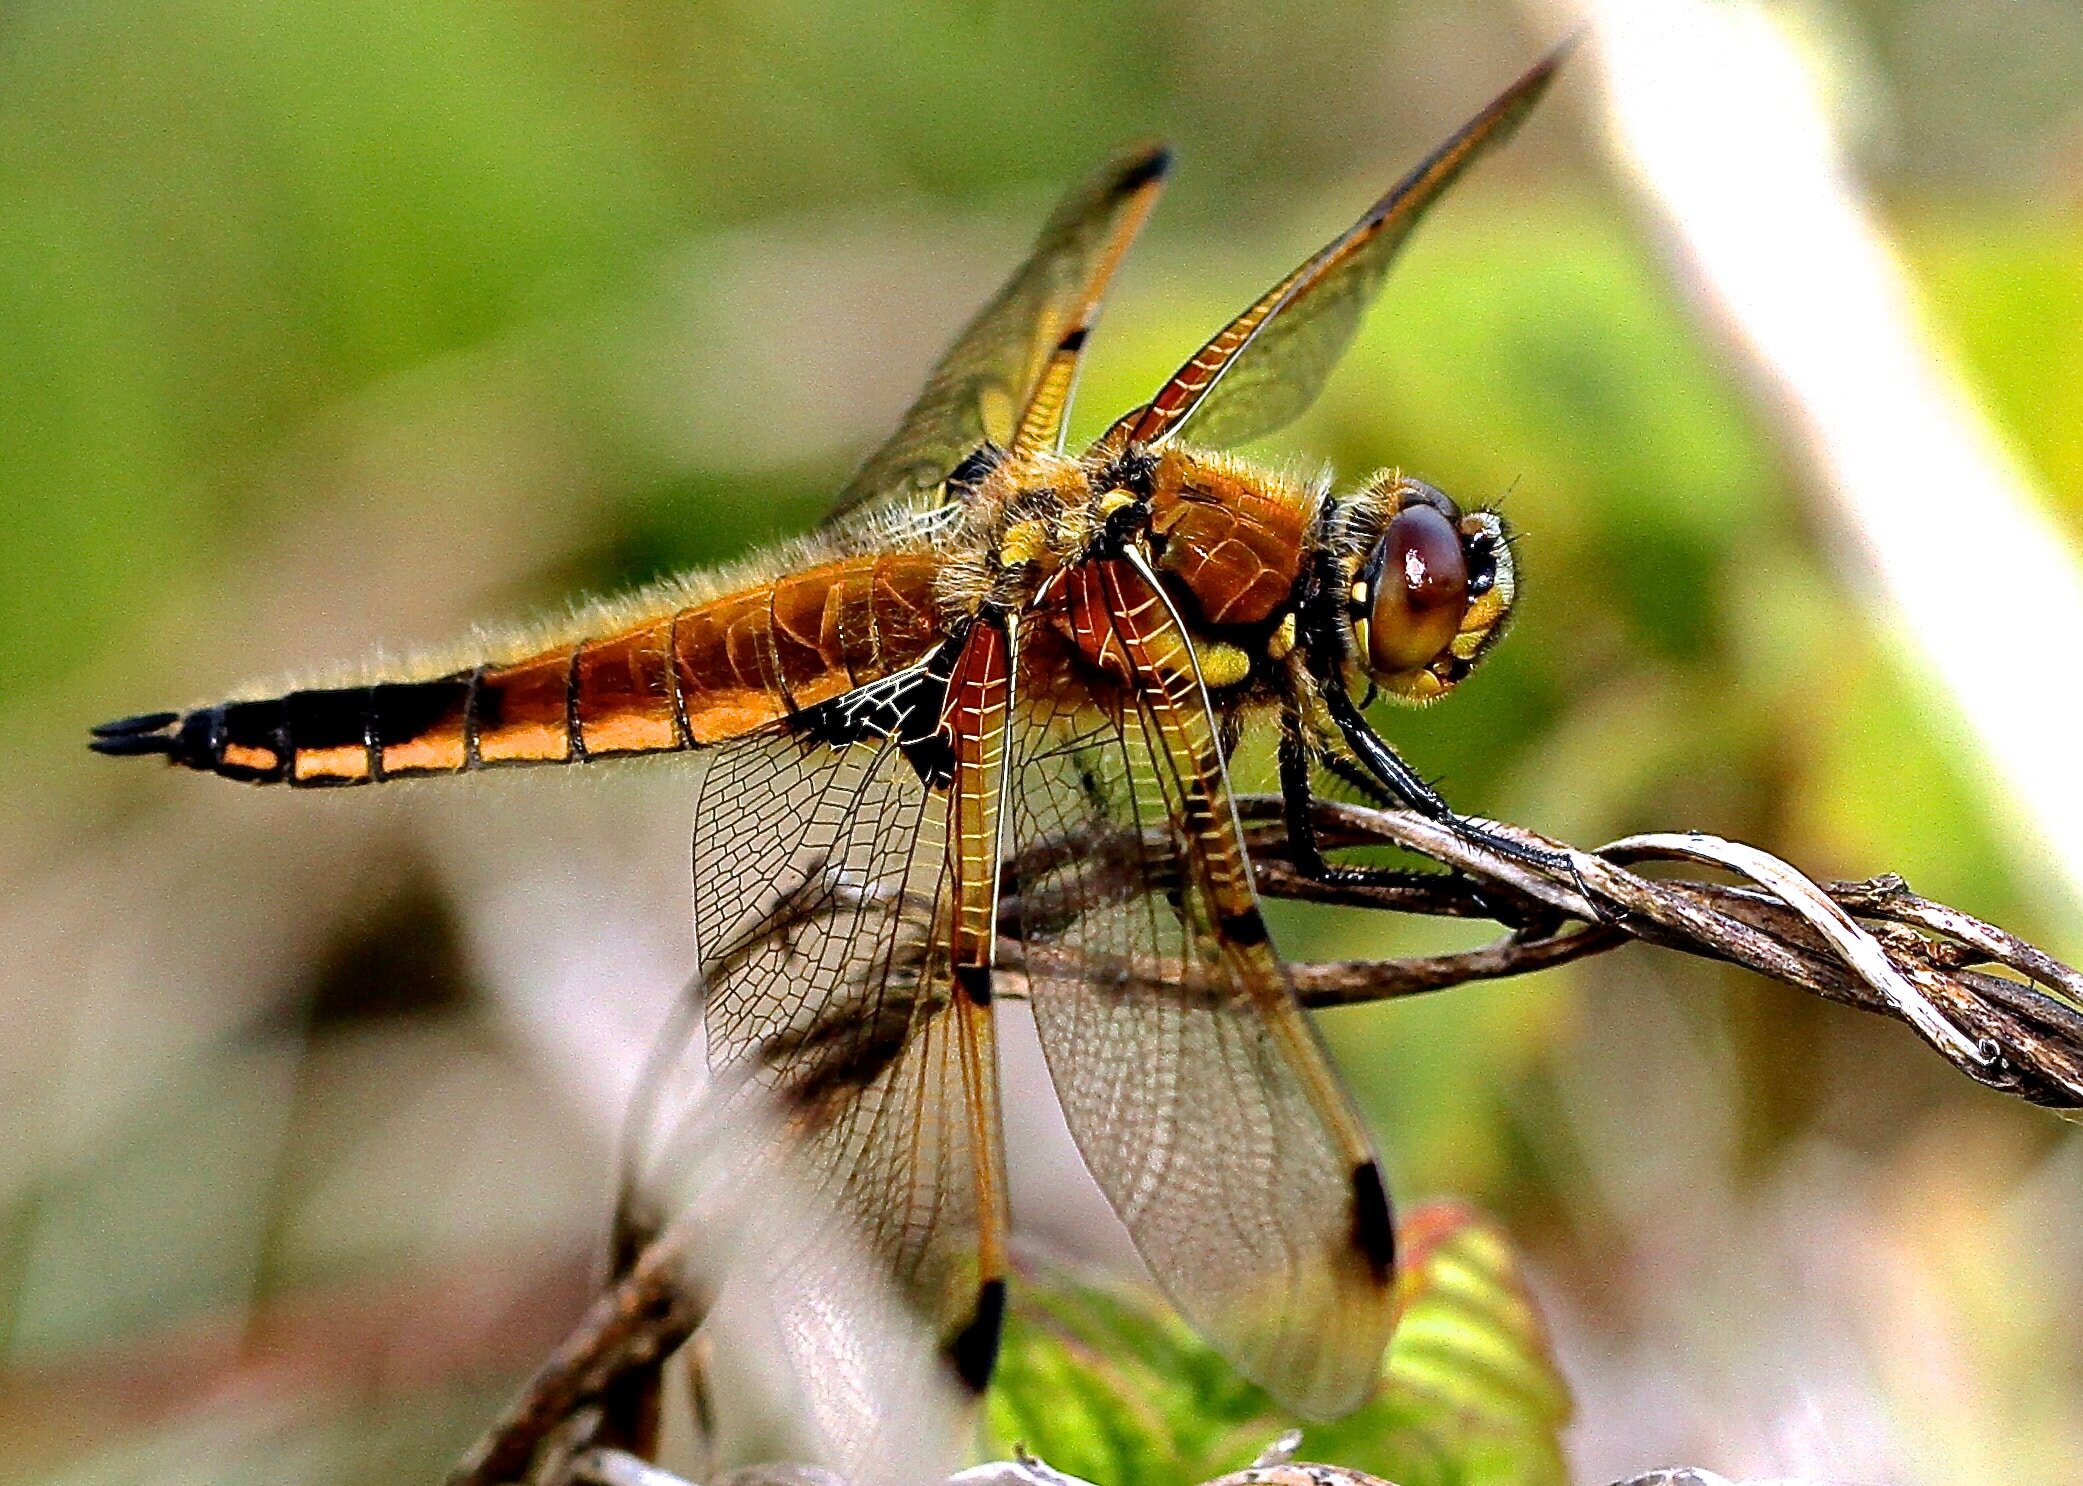  Dragonflies (and potentially some other insect species) were the first animals to take to the air about 350 million years ago. They dominated the skies well before pterosaurs, birds, and bats. 